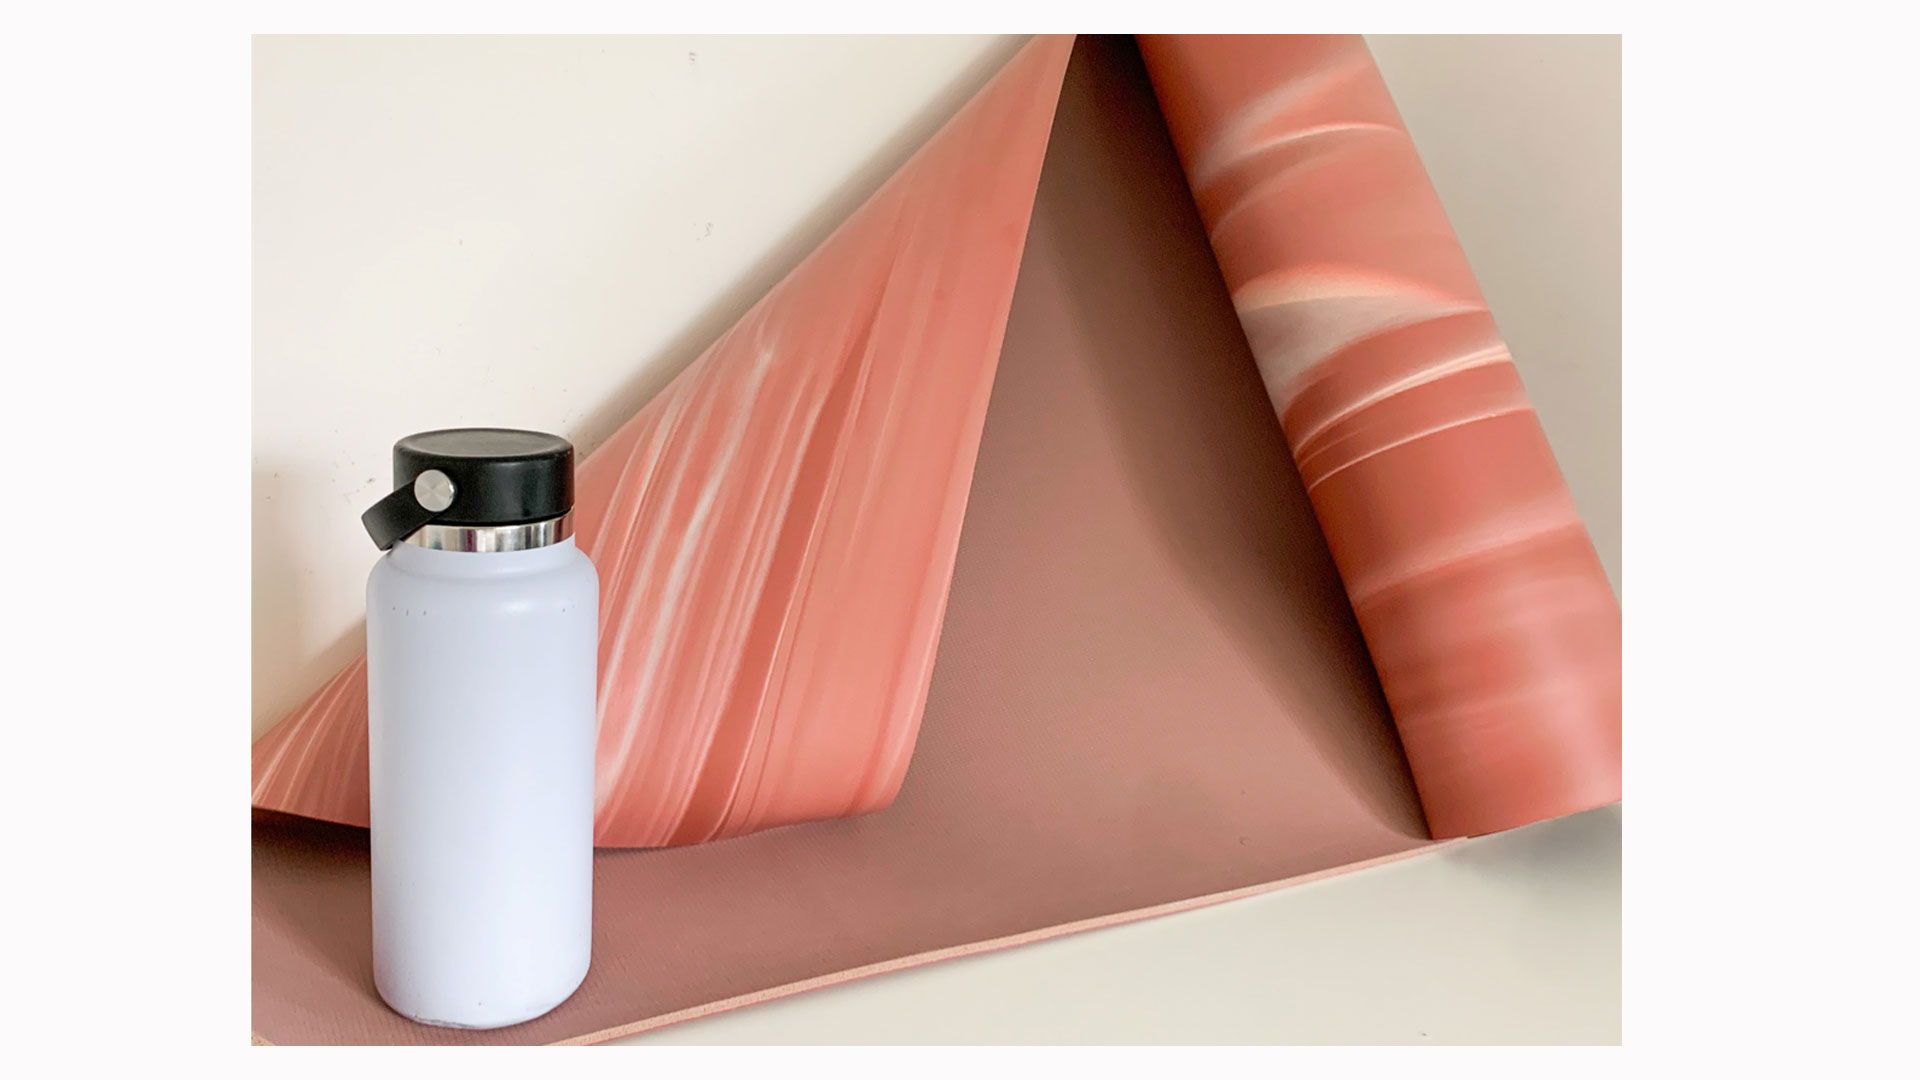 Image shows a half-unrolled pink Lululemon Reversible 5mm Yoga Mat next to a white metal water bottle.